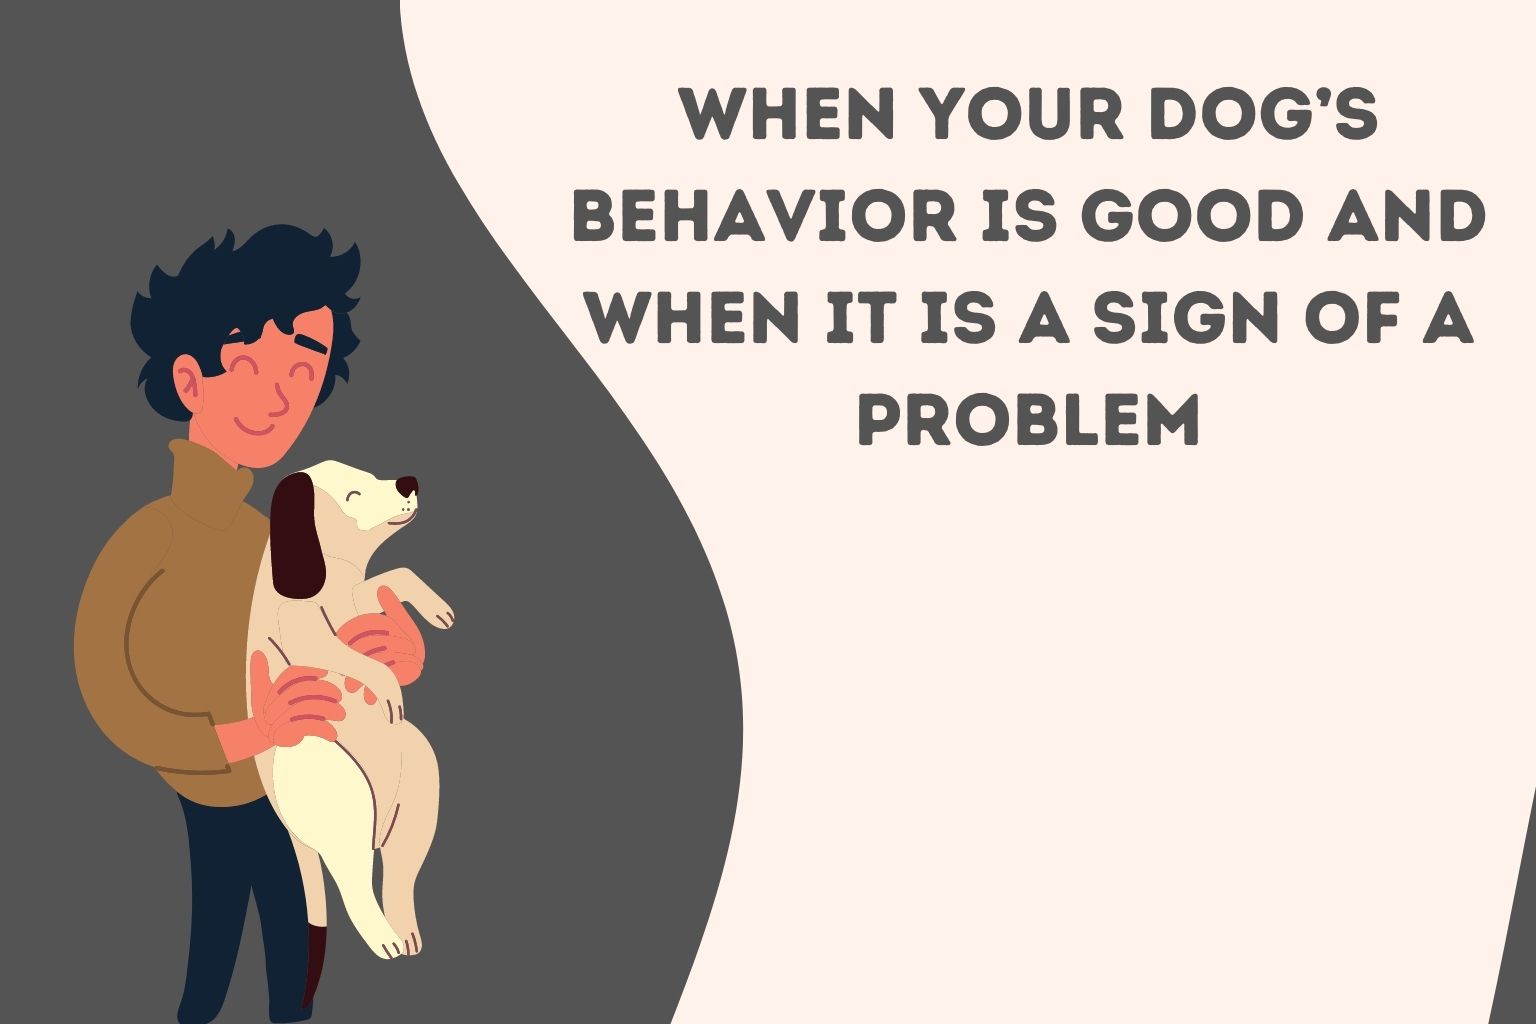 When Your Dog’s Behavior is Good and When It is a Sign of a Problem